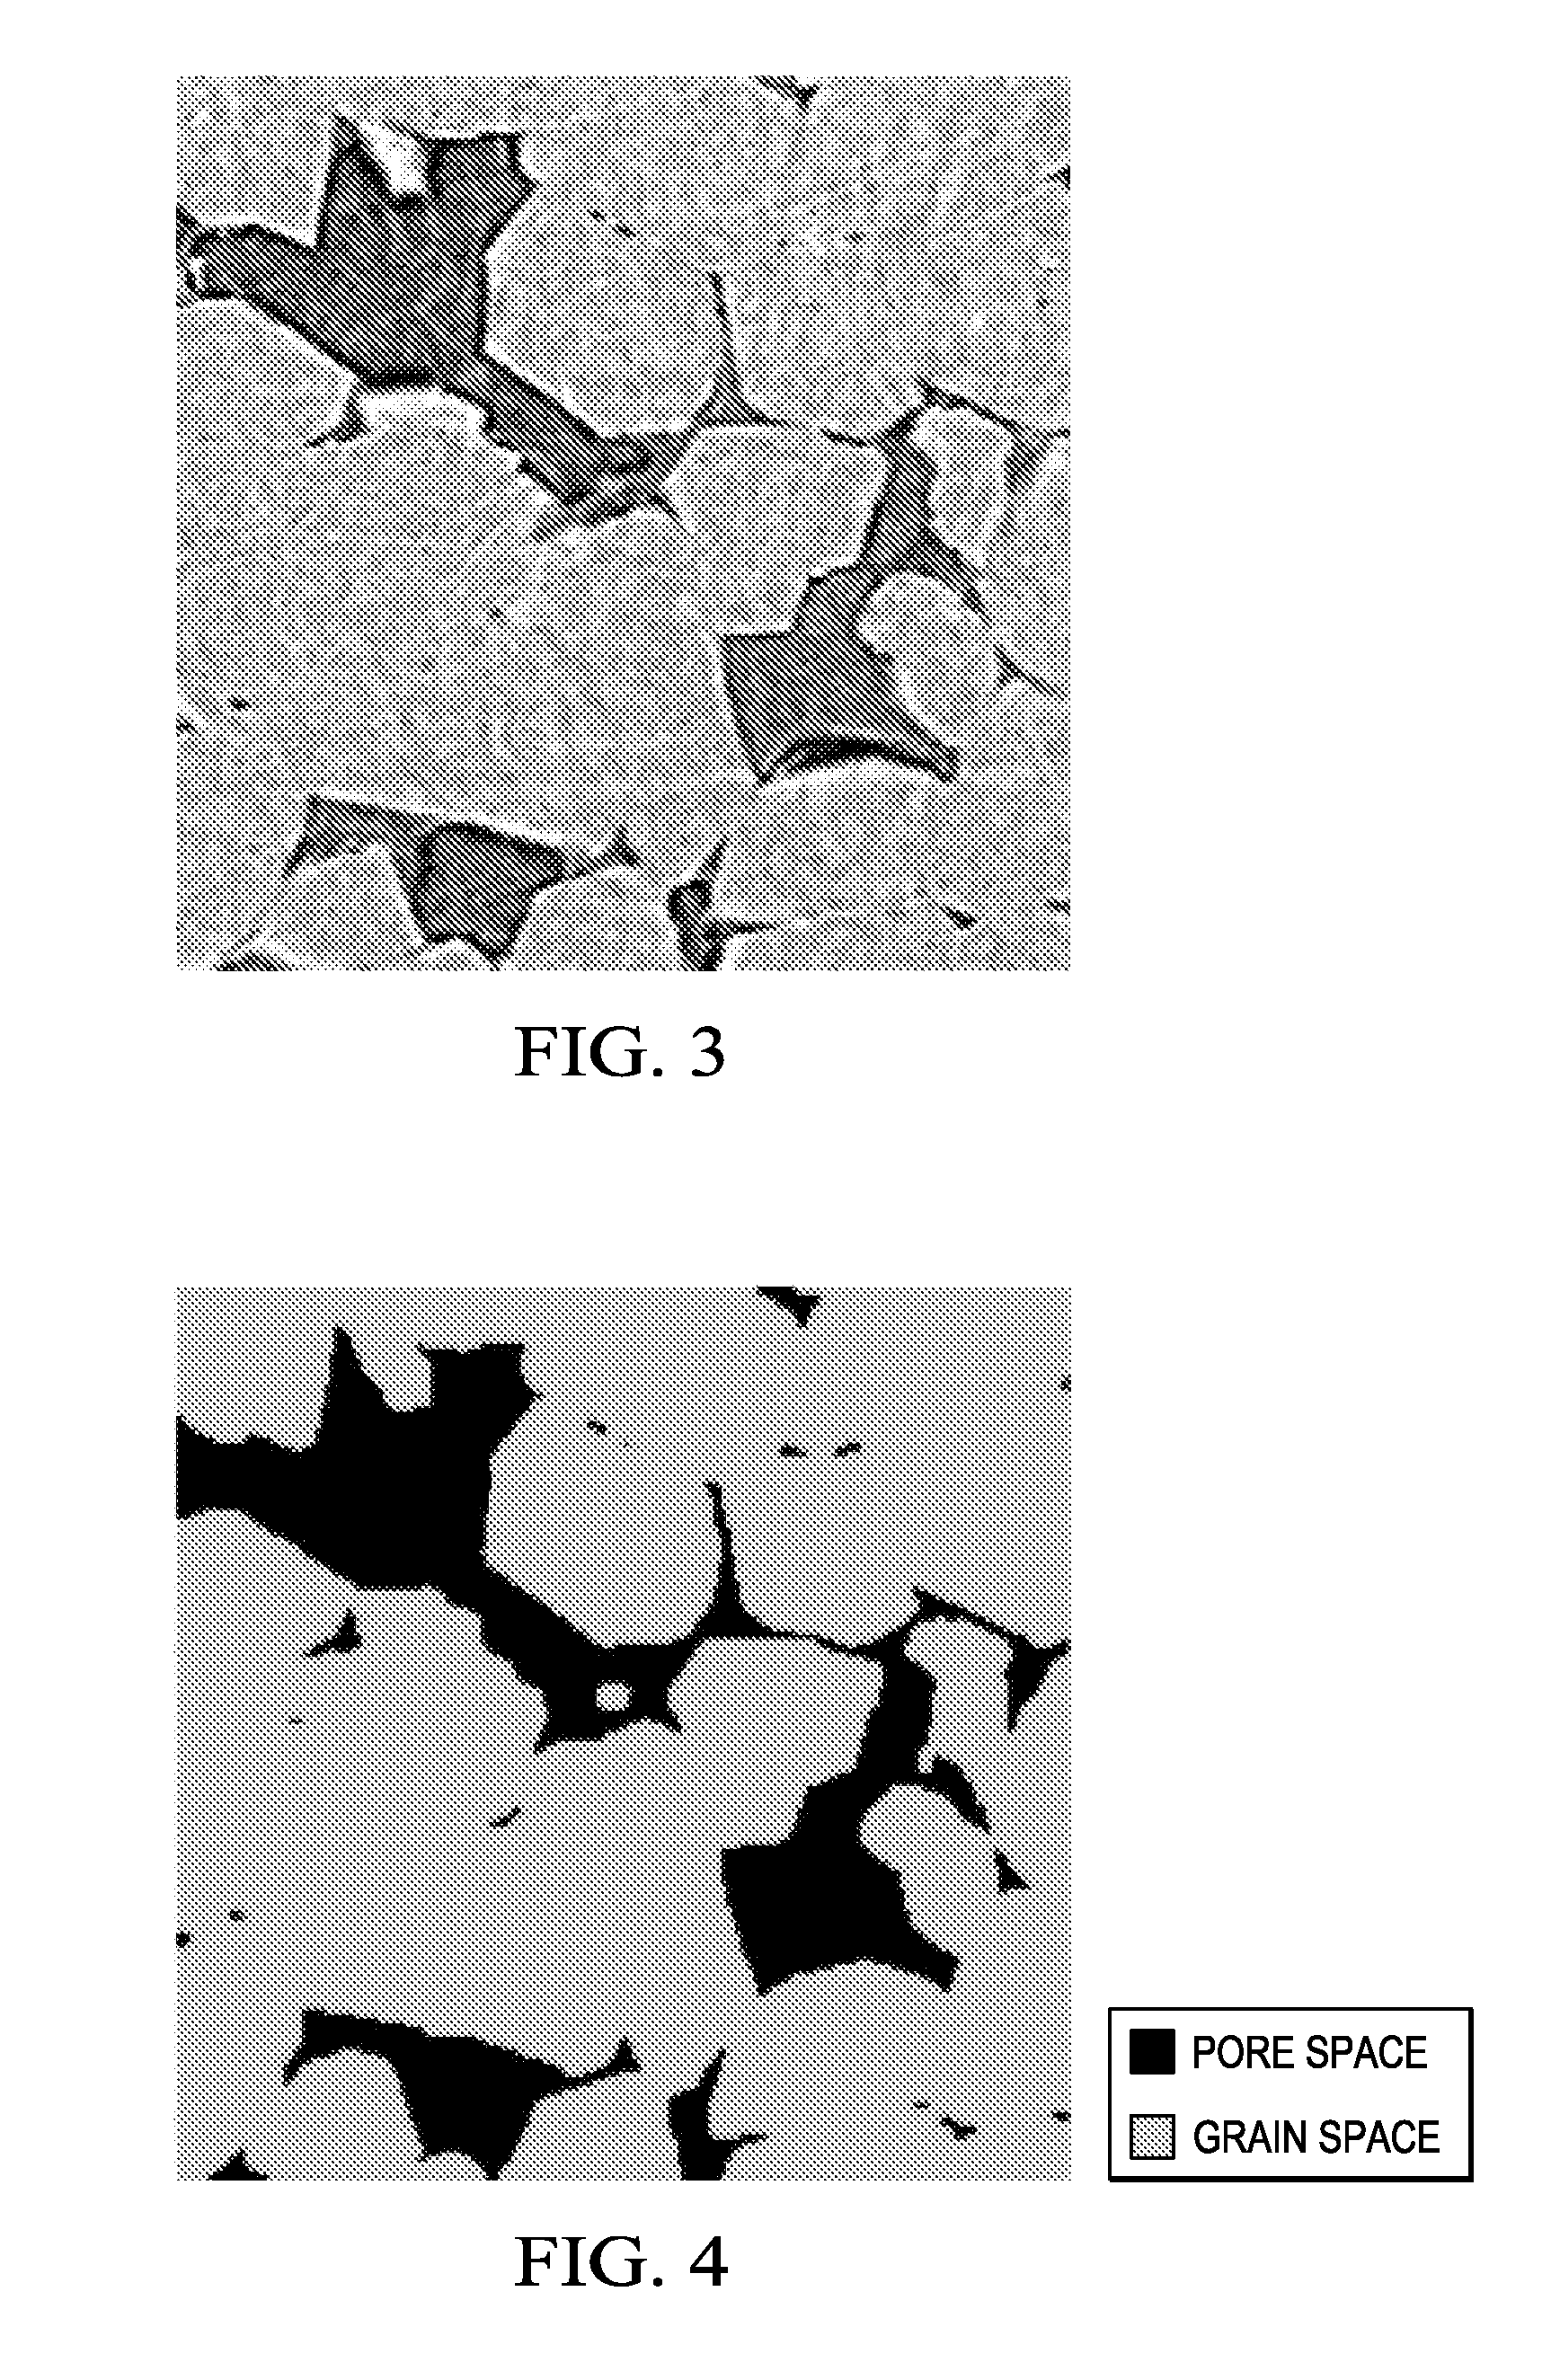 Systems and Methods for Improving Direct Numerical Simulation of Material Properties from Rock Samples and Determining Uncertainty in the Material Properties